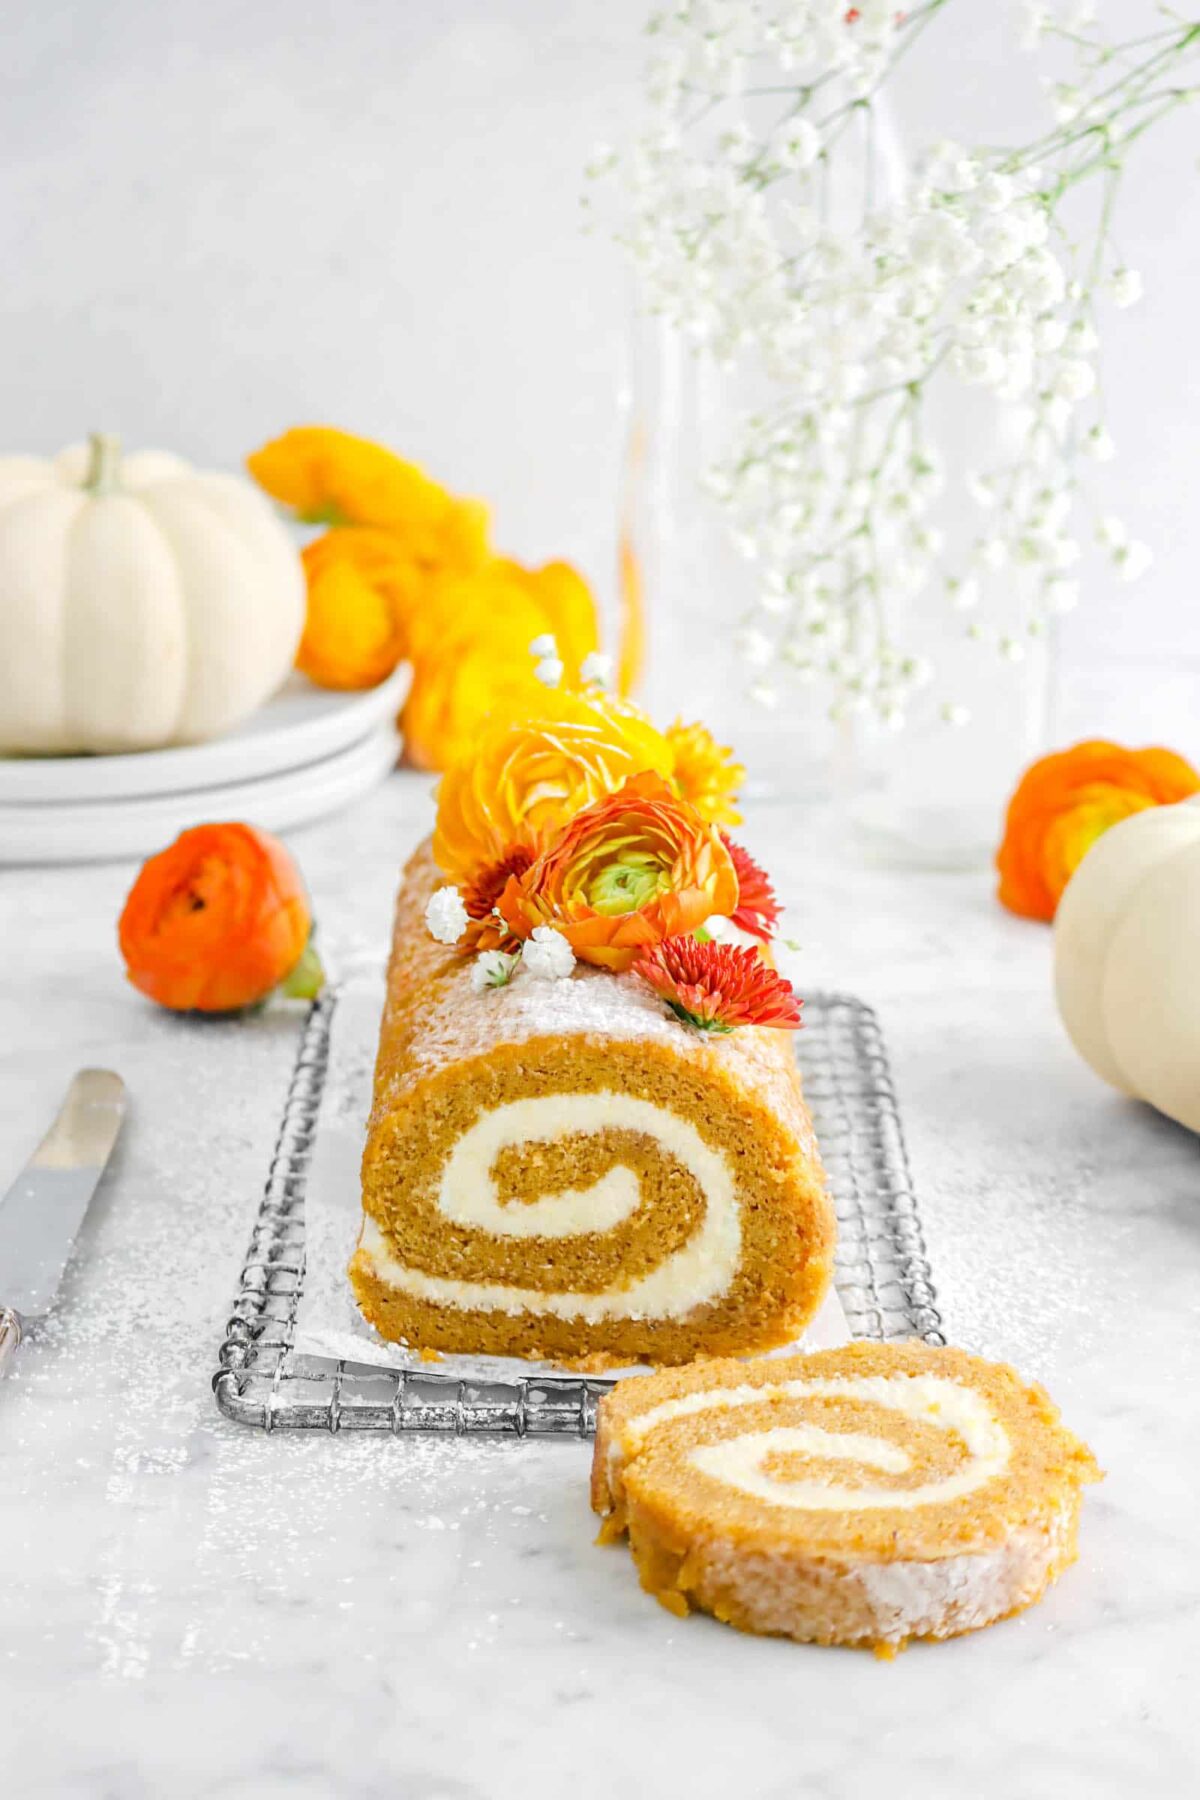 Spiced Pumpkin Roll with White Chocolate Cream Cheese Filling